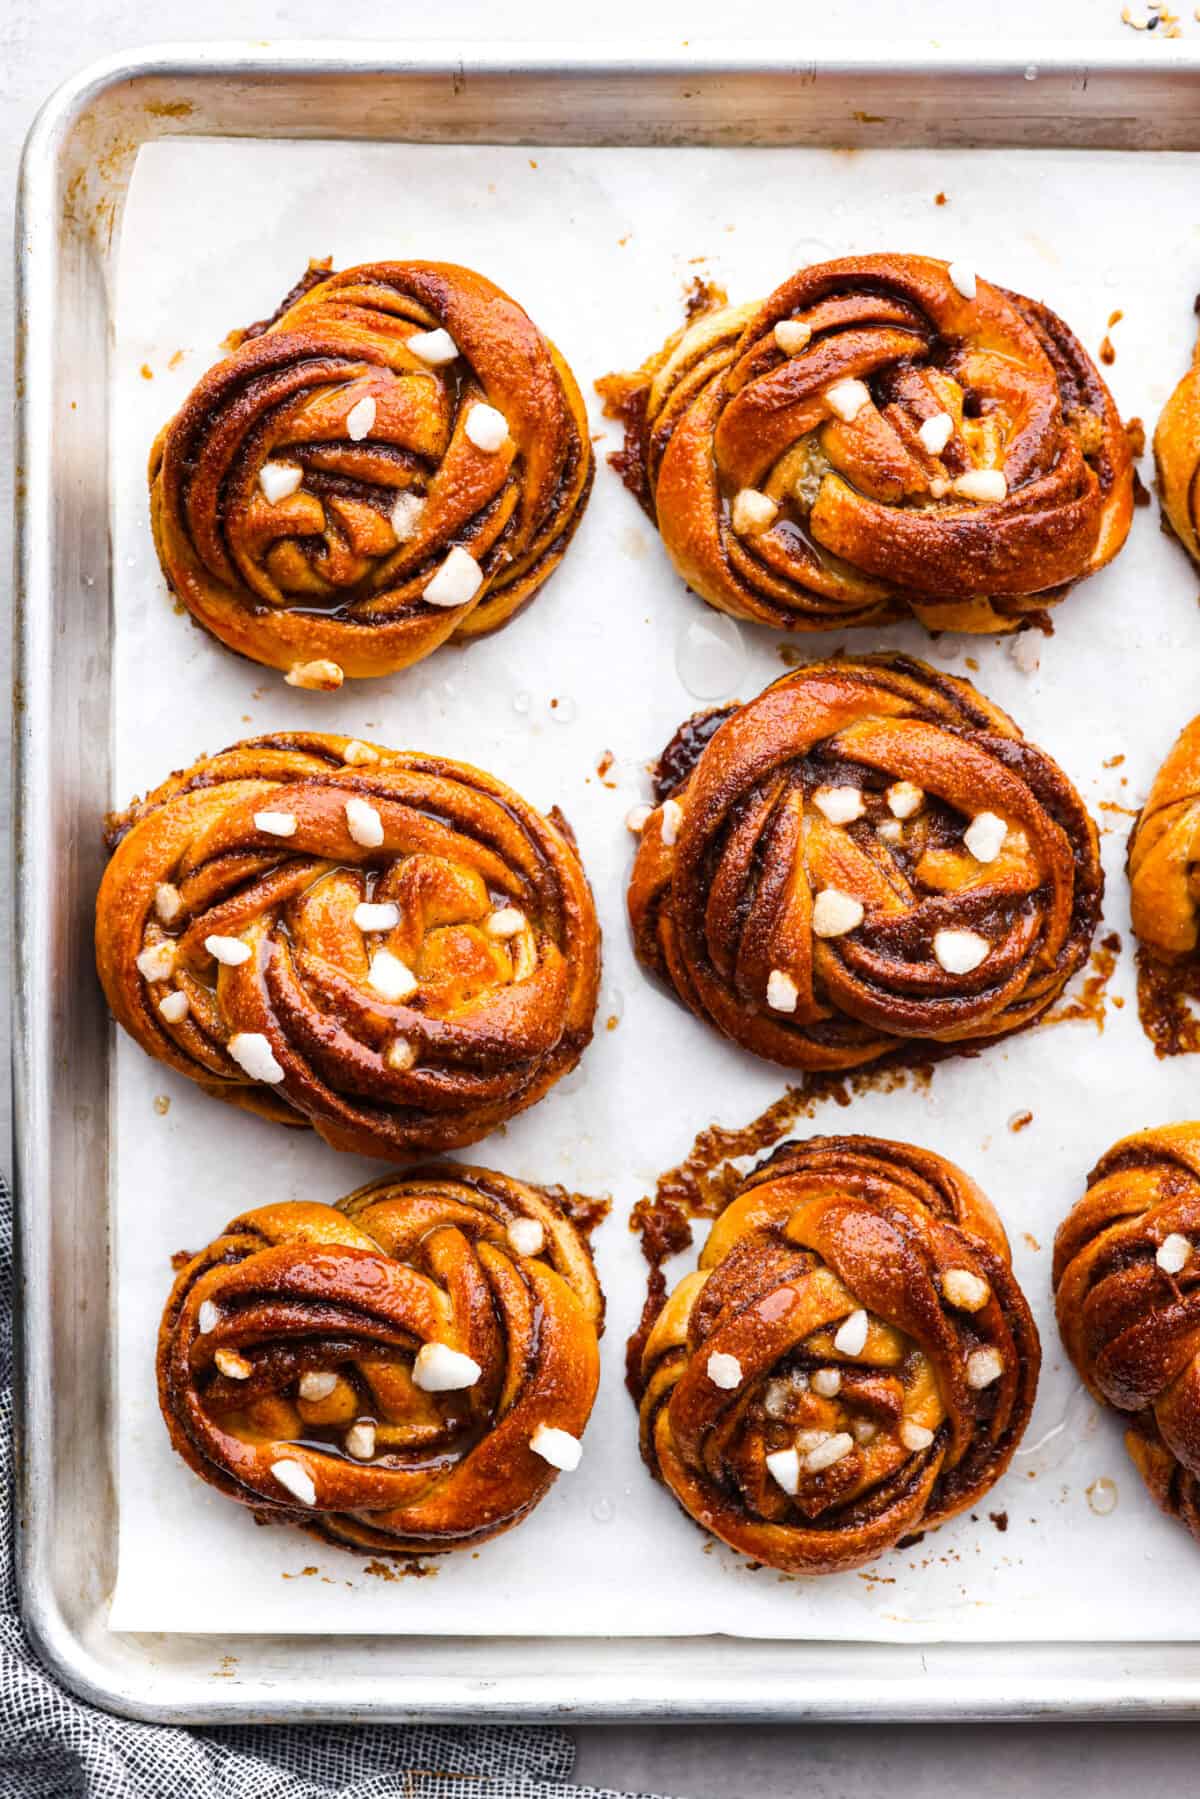 Kanelbullar on a baking sheet lined with parchment paper.